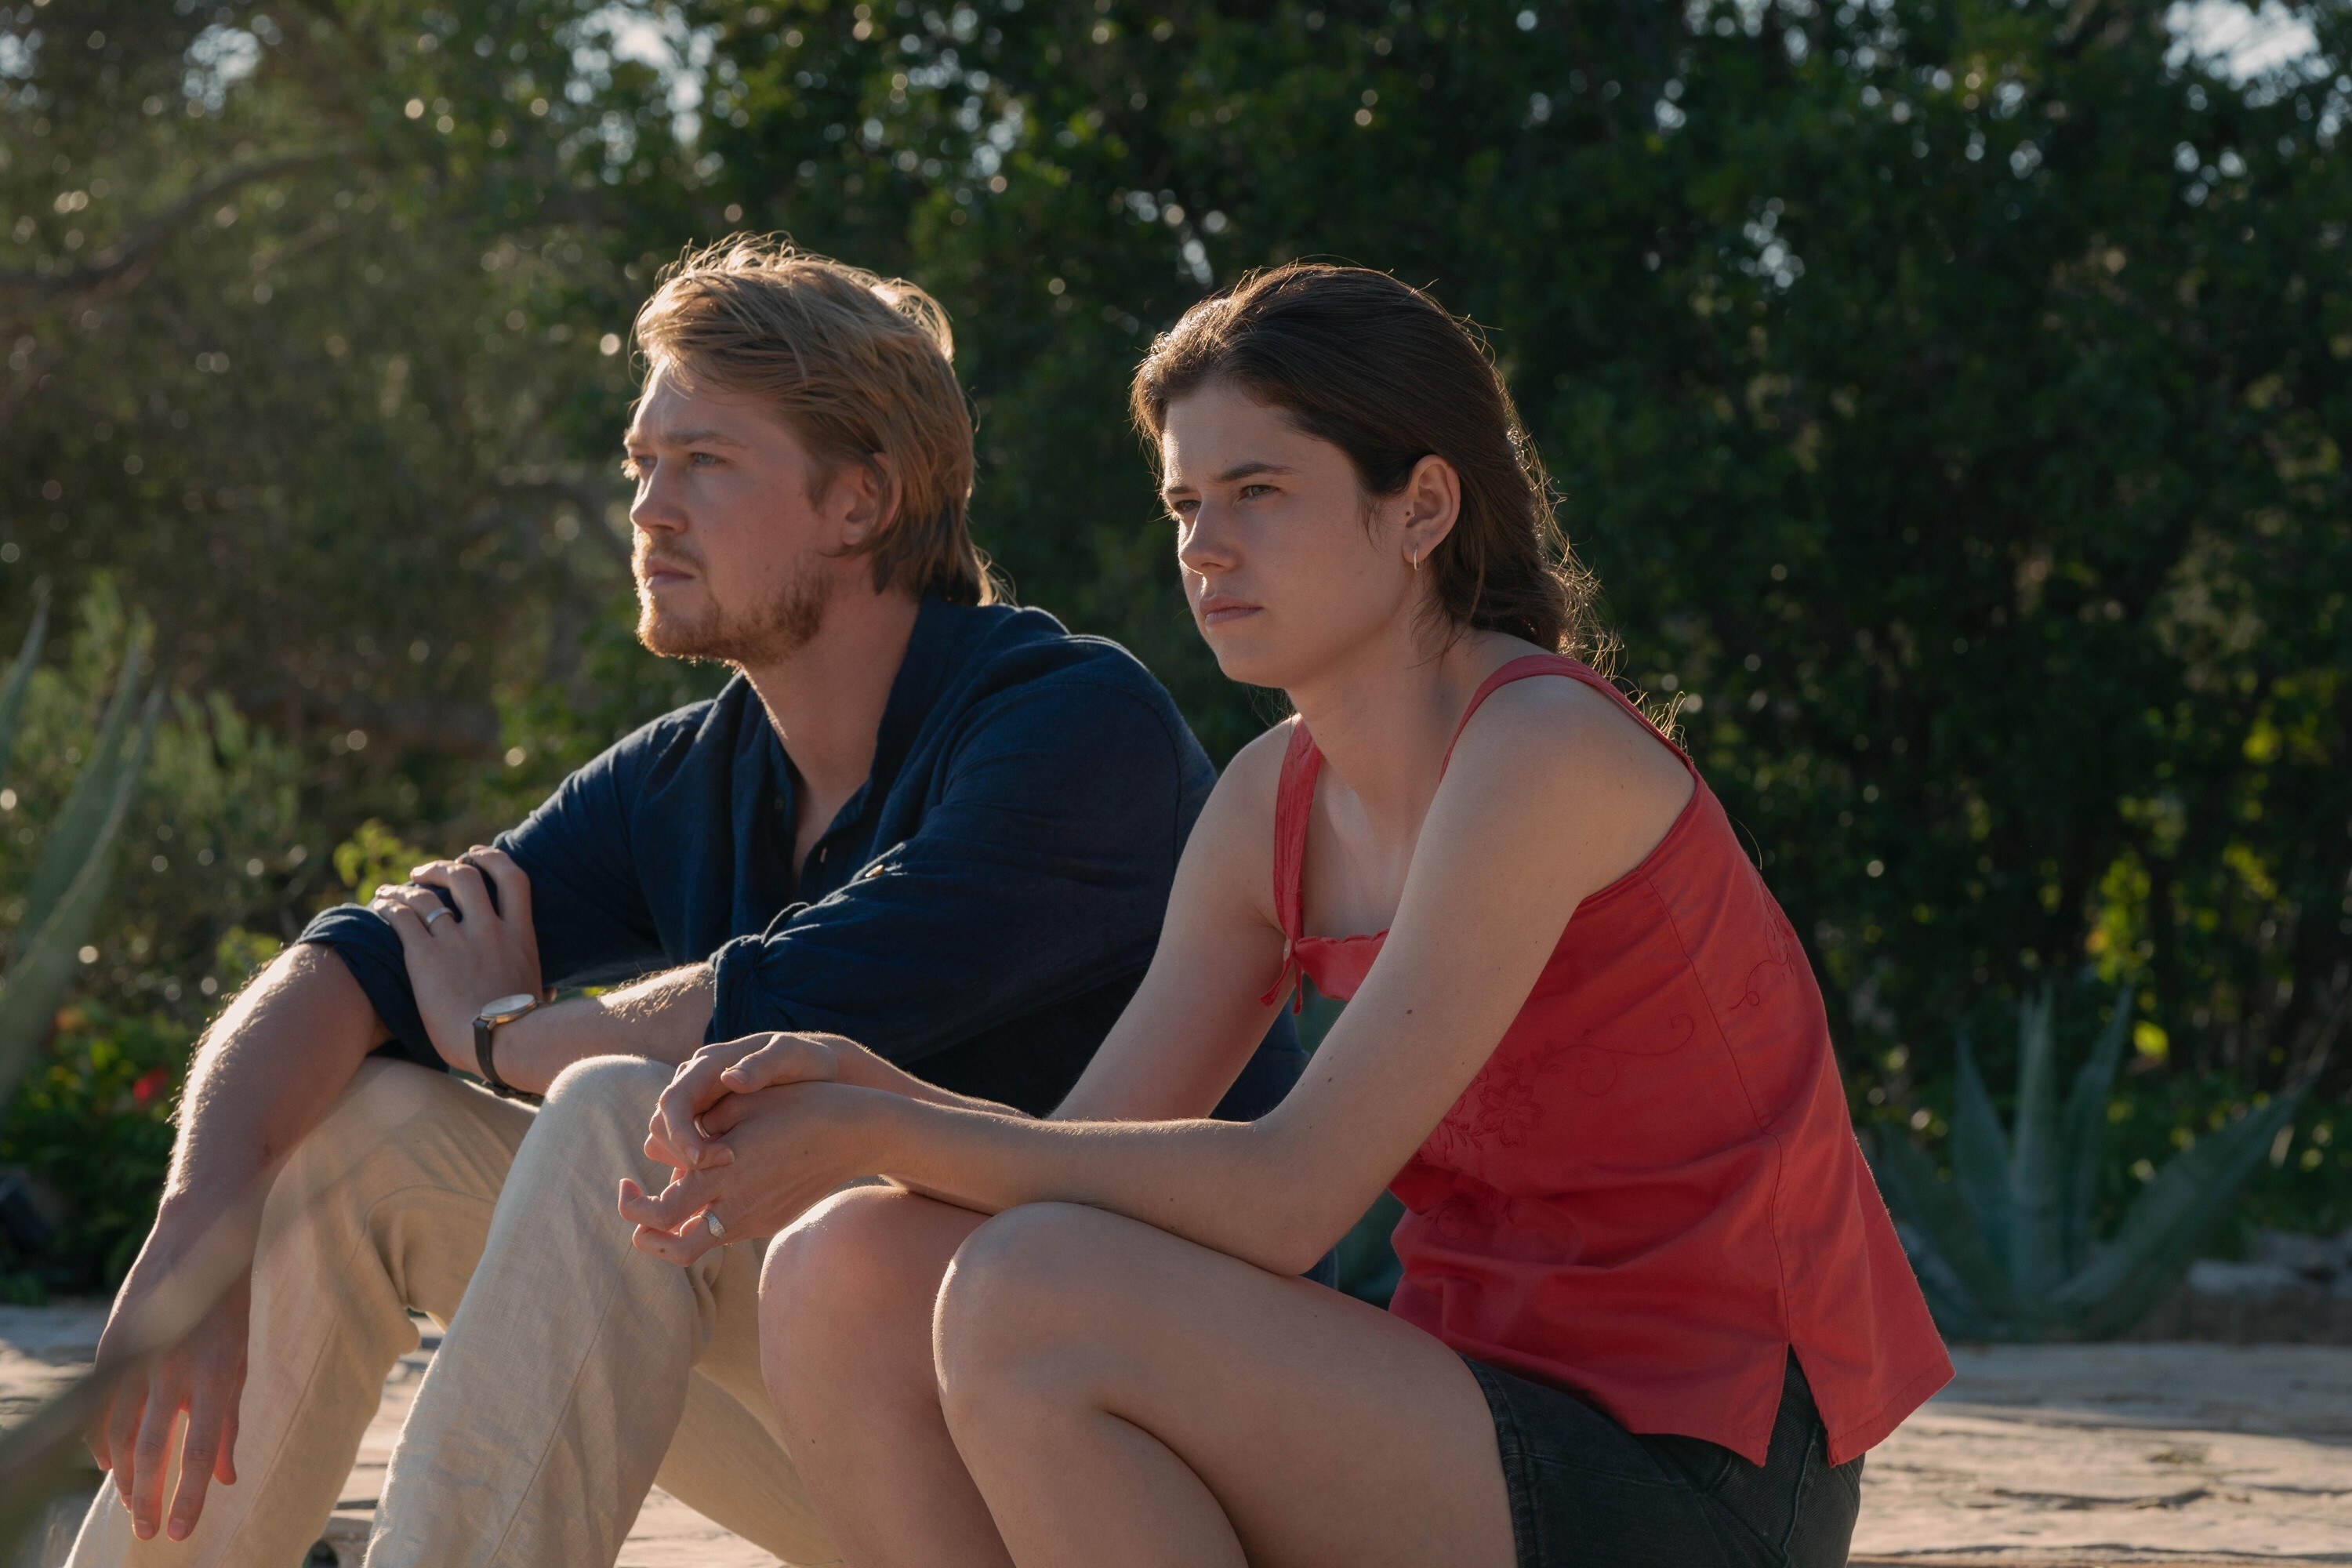 Joe Alwyn sits on the ground outside; a young woman sits next to him